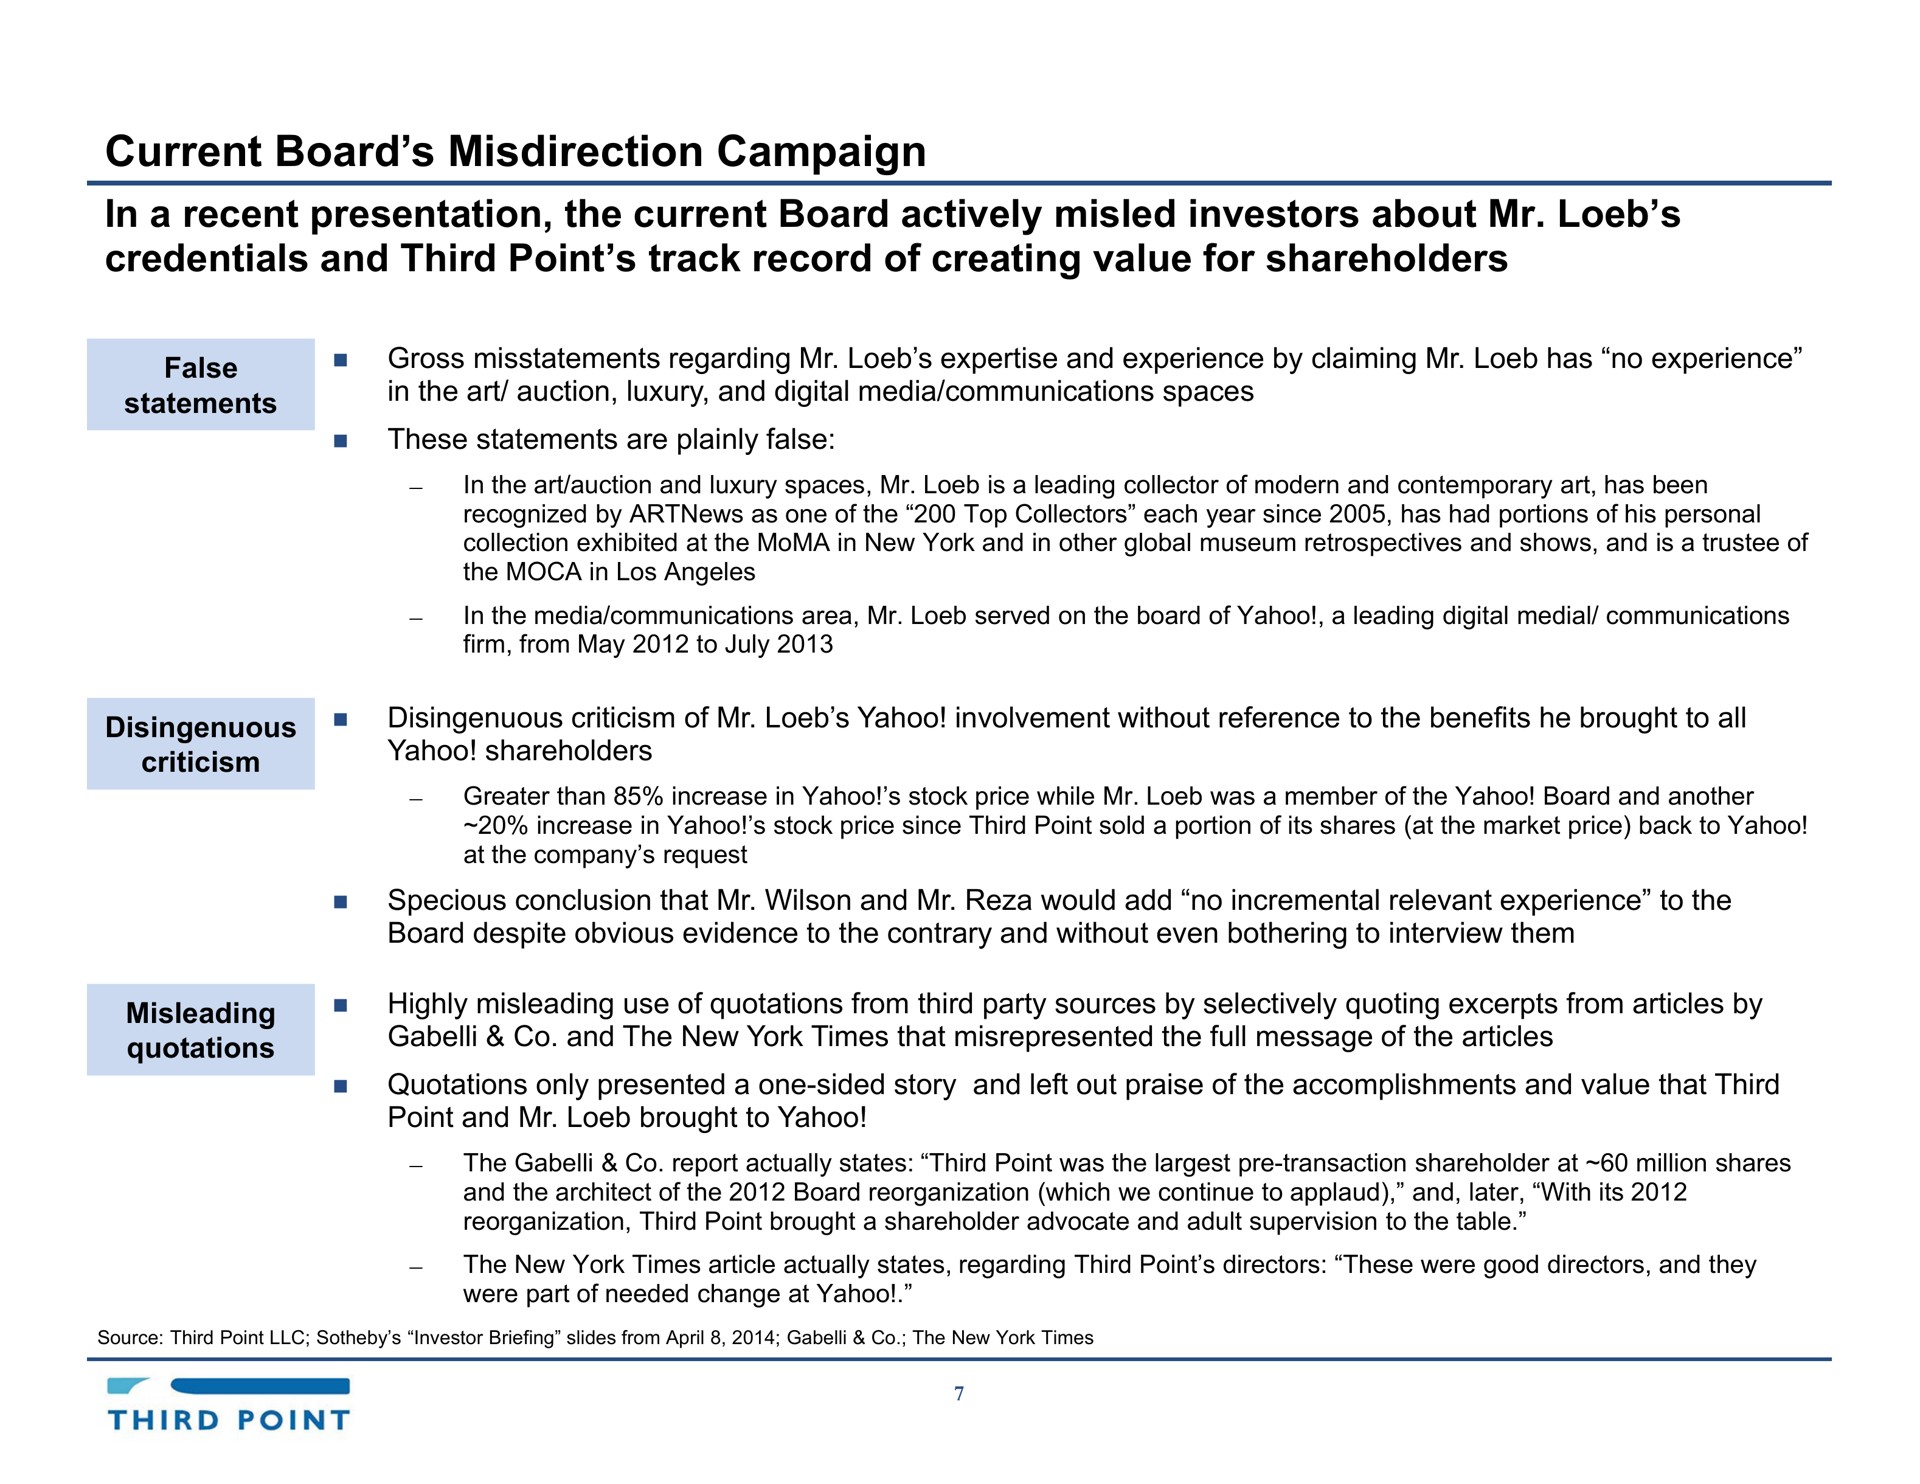 current board misdirection campaign in a recent presentation the current board actively misled investors about credentials and third point track record of creating value for shareholders | Third Point Management